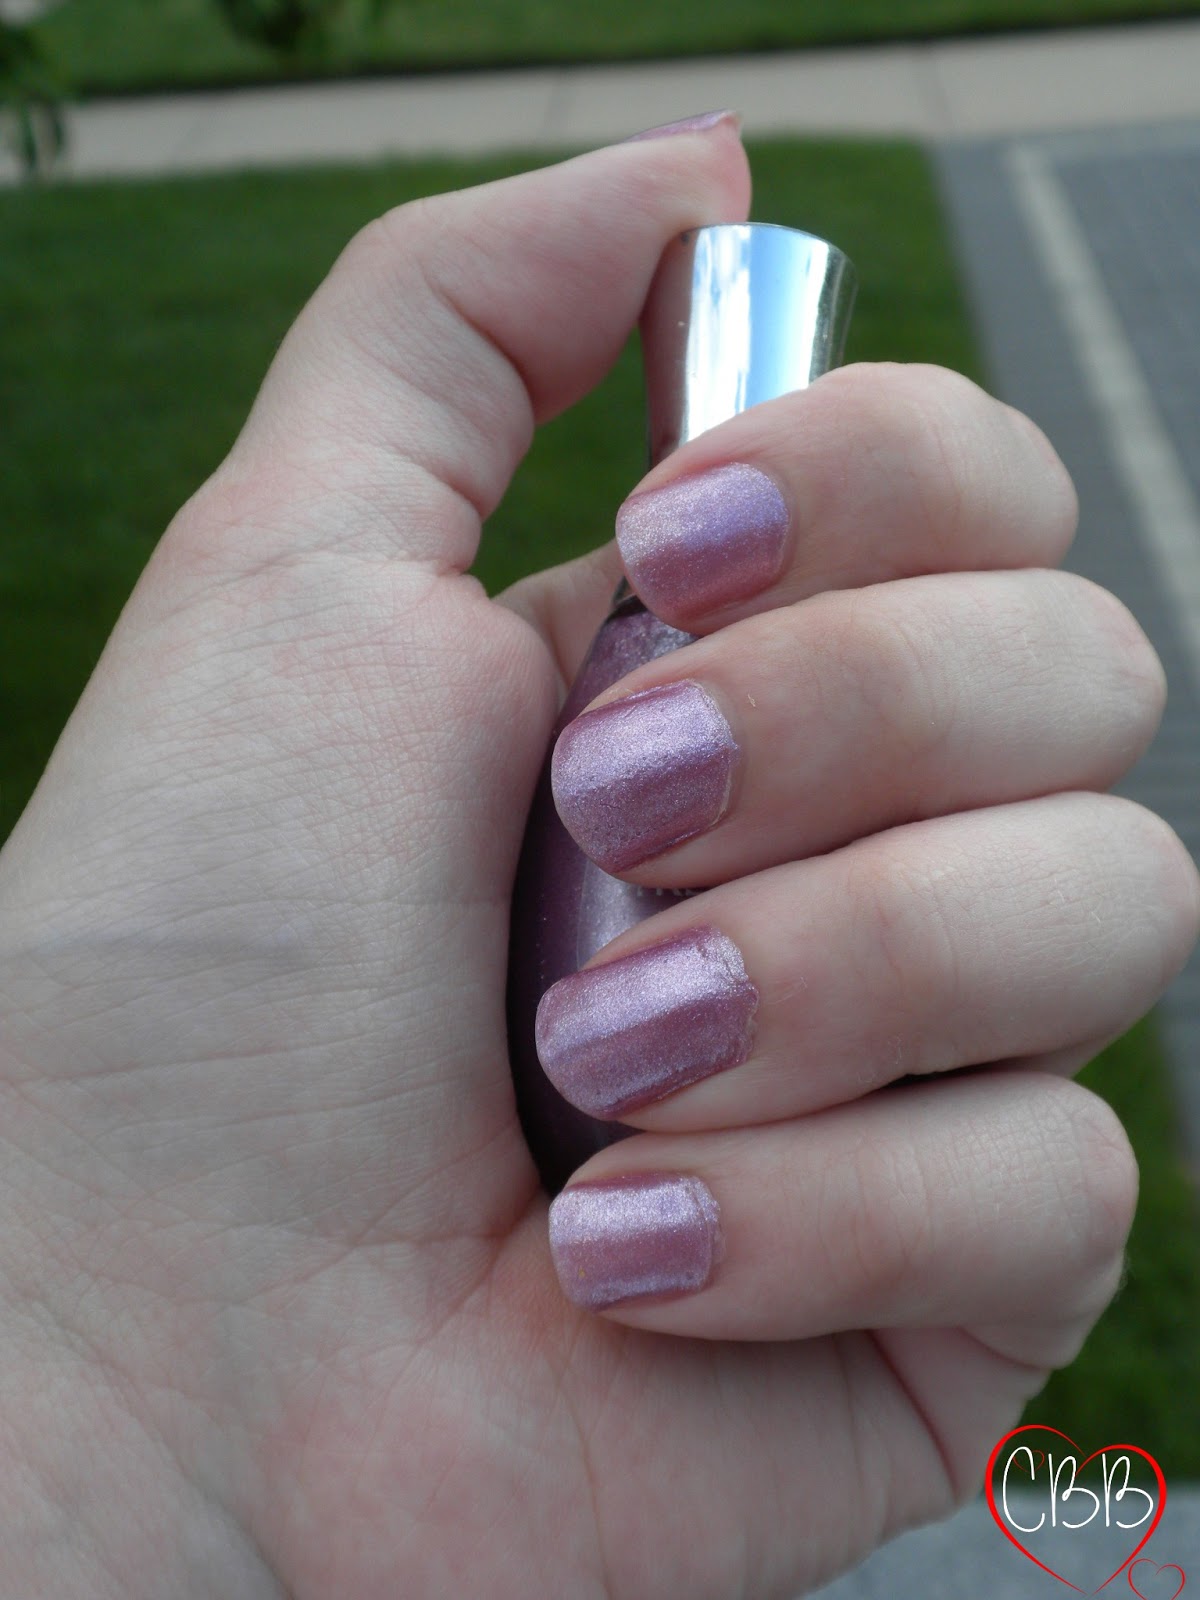 omdraaien Emuleren conversie Sammi the Beauty Buff: Review: Sally Hansen Diamond Strength Nail Color in  Forever Lilac